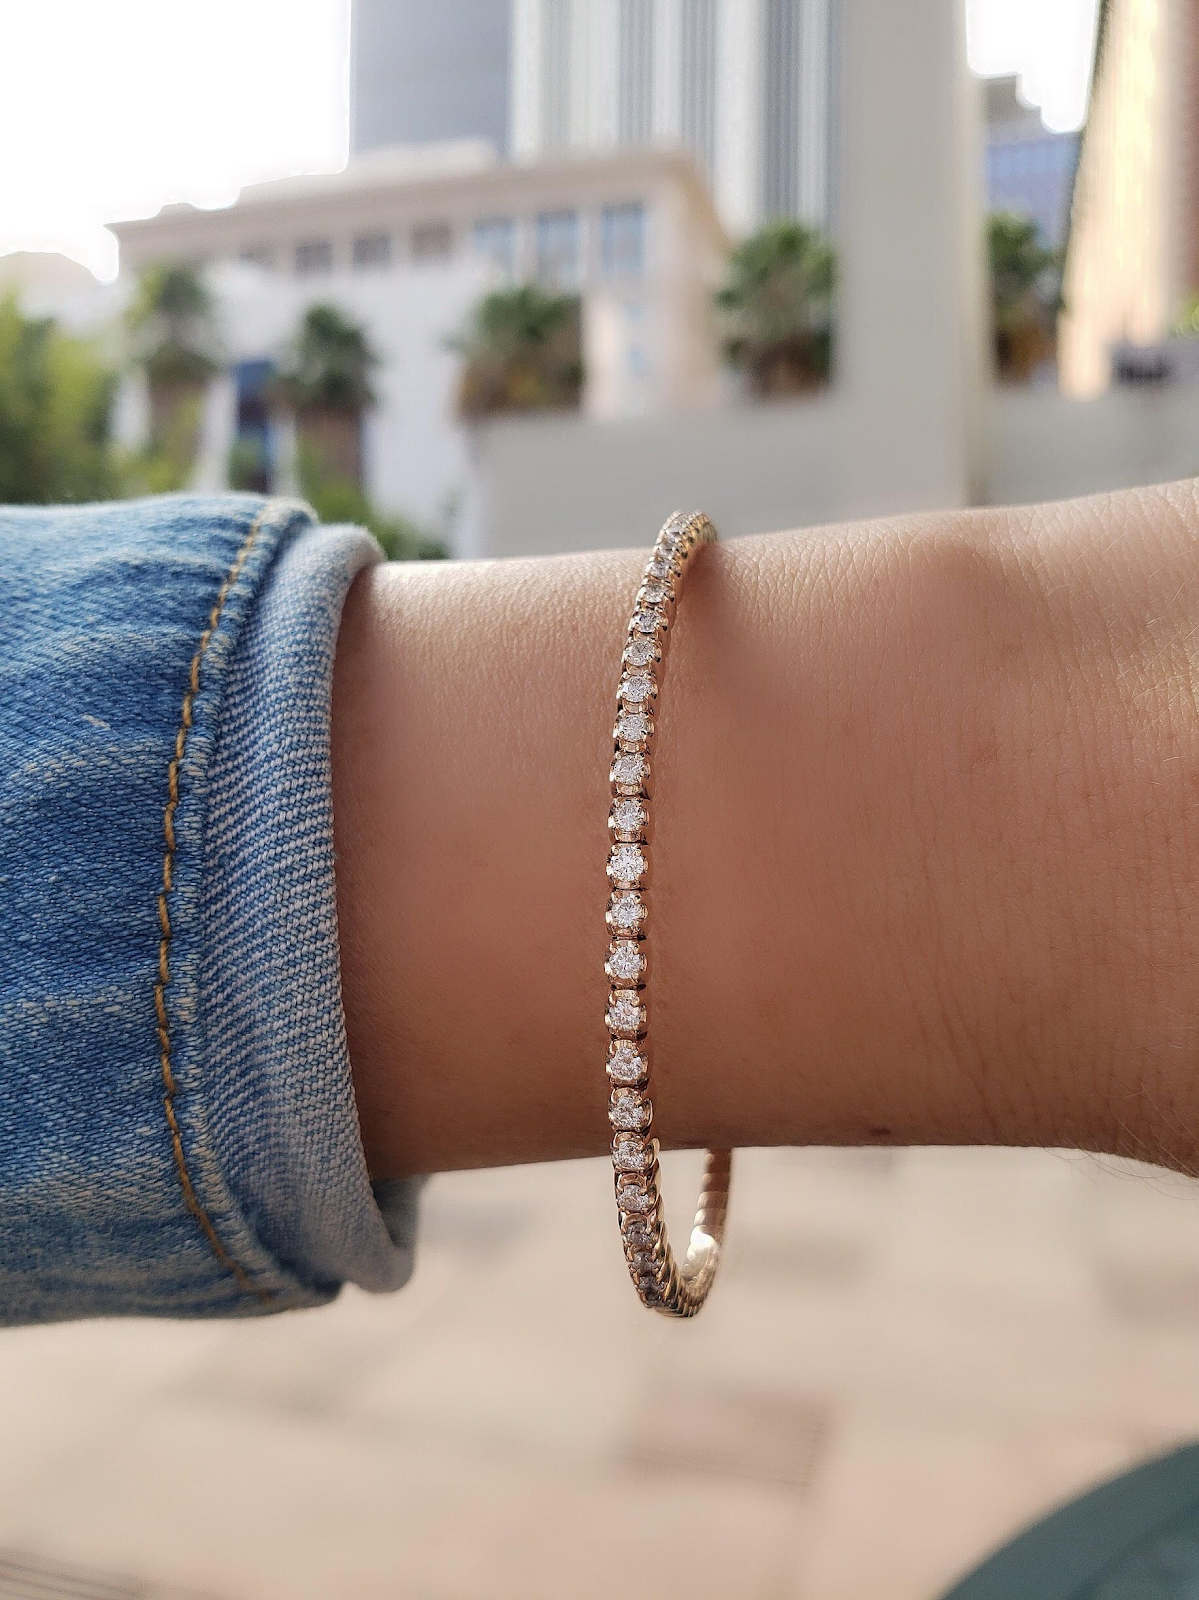 Which Diamond Setting is to Prefer While Purchasing Diamond Bracelets